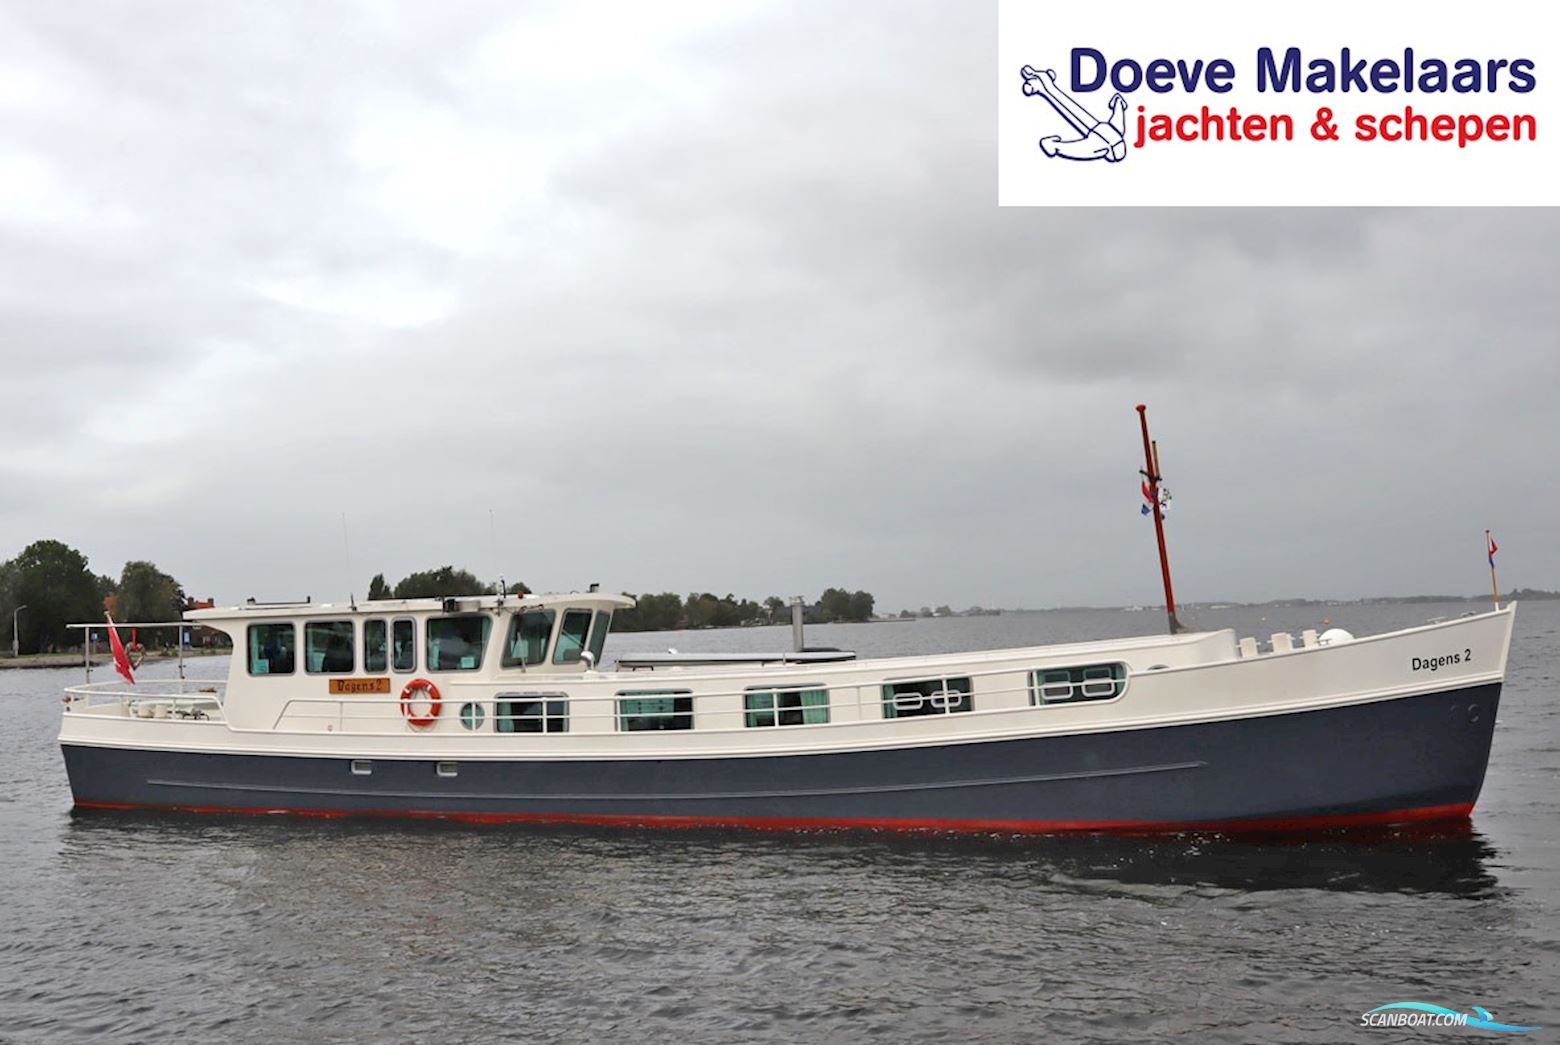 Beurtmotor 23.15 Met Cbb Live a board / River boat 2004, with Daewoo<br />L136 engine, The Netherlands